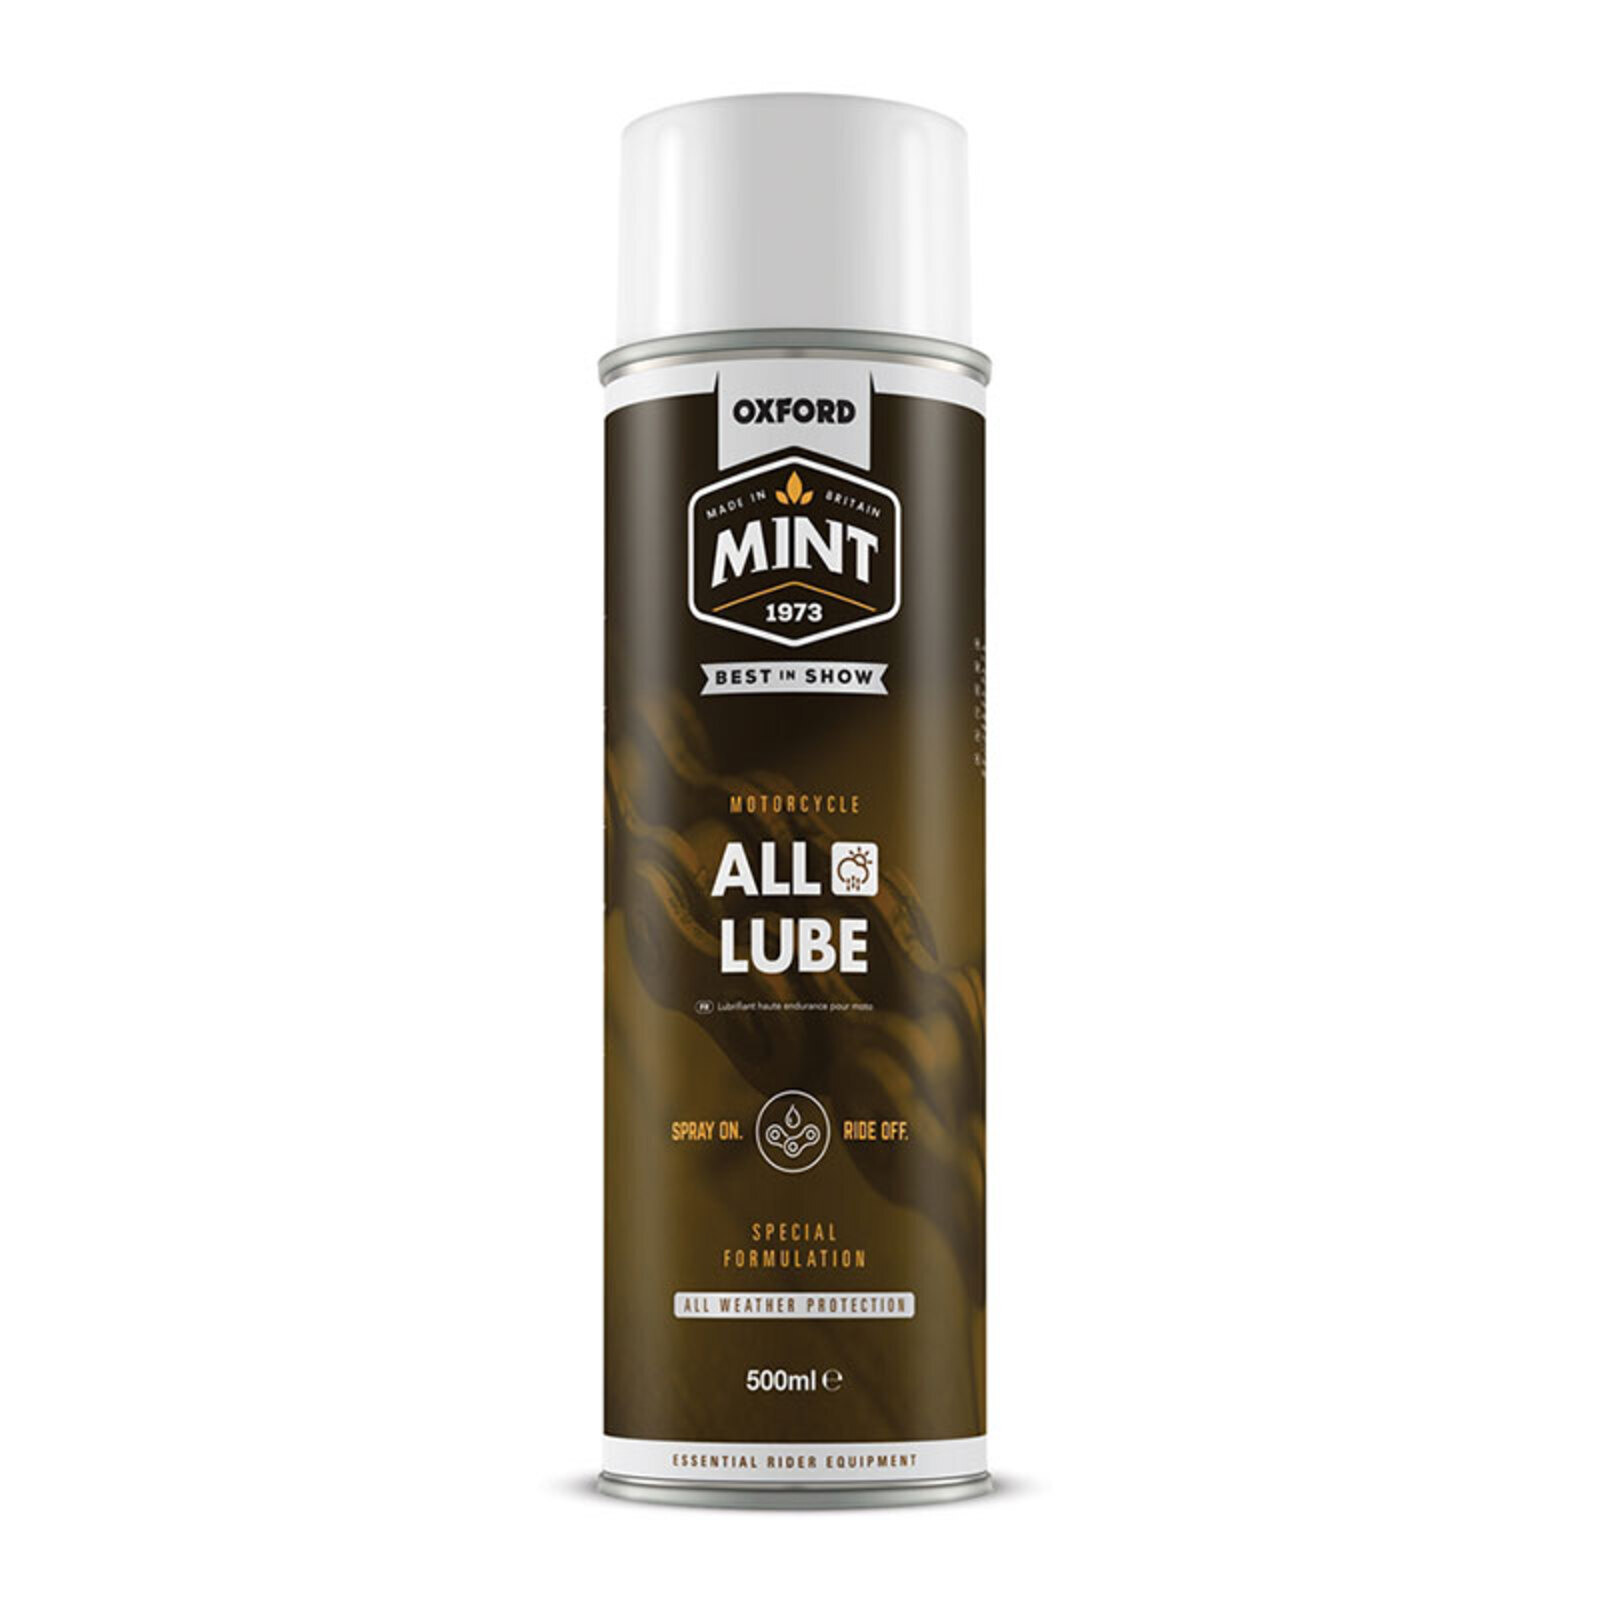 OXFORD MINT ALL WEATHER LUBE 500ML